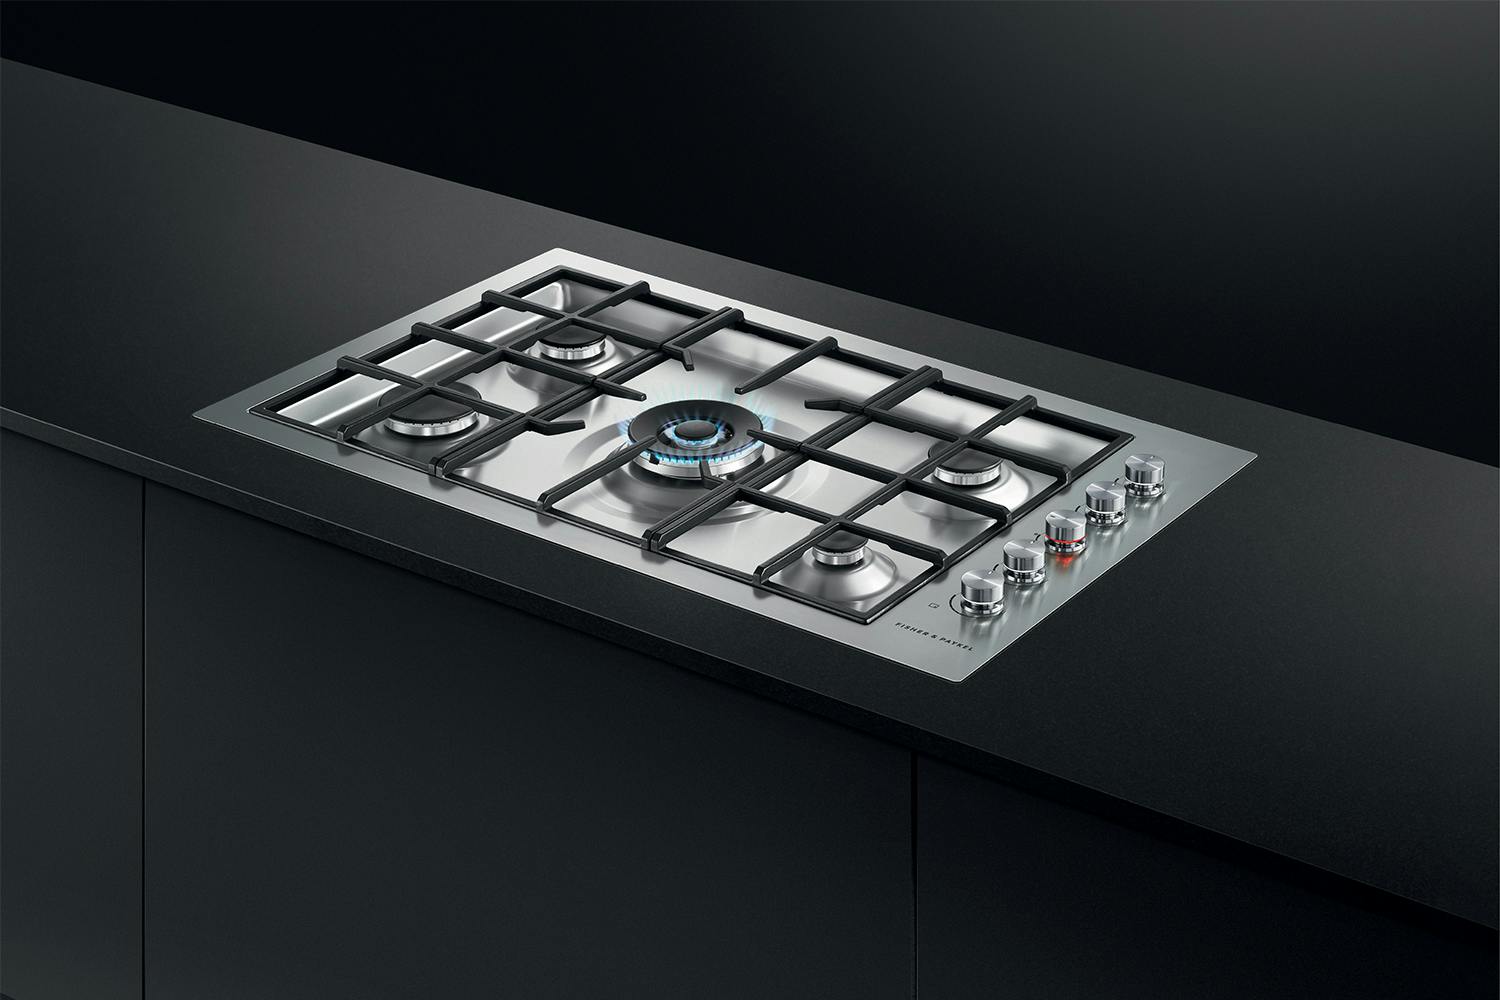 Fisher & Paykel 90cm Gas Cooktop - Stainless Steel